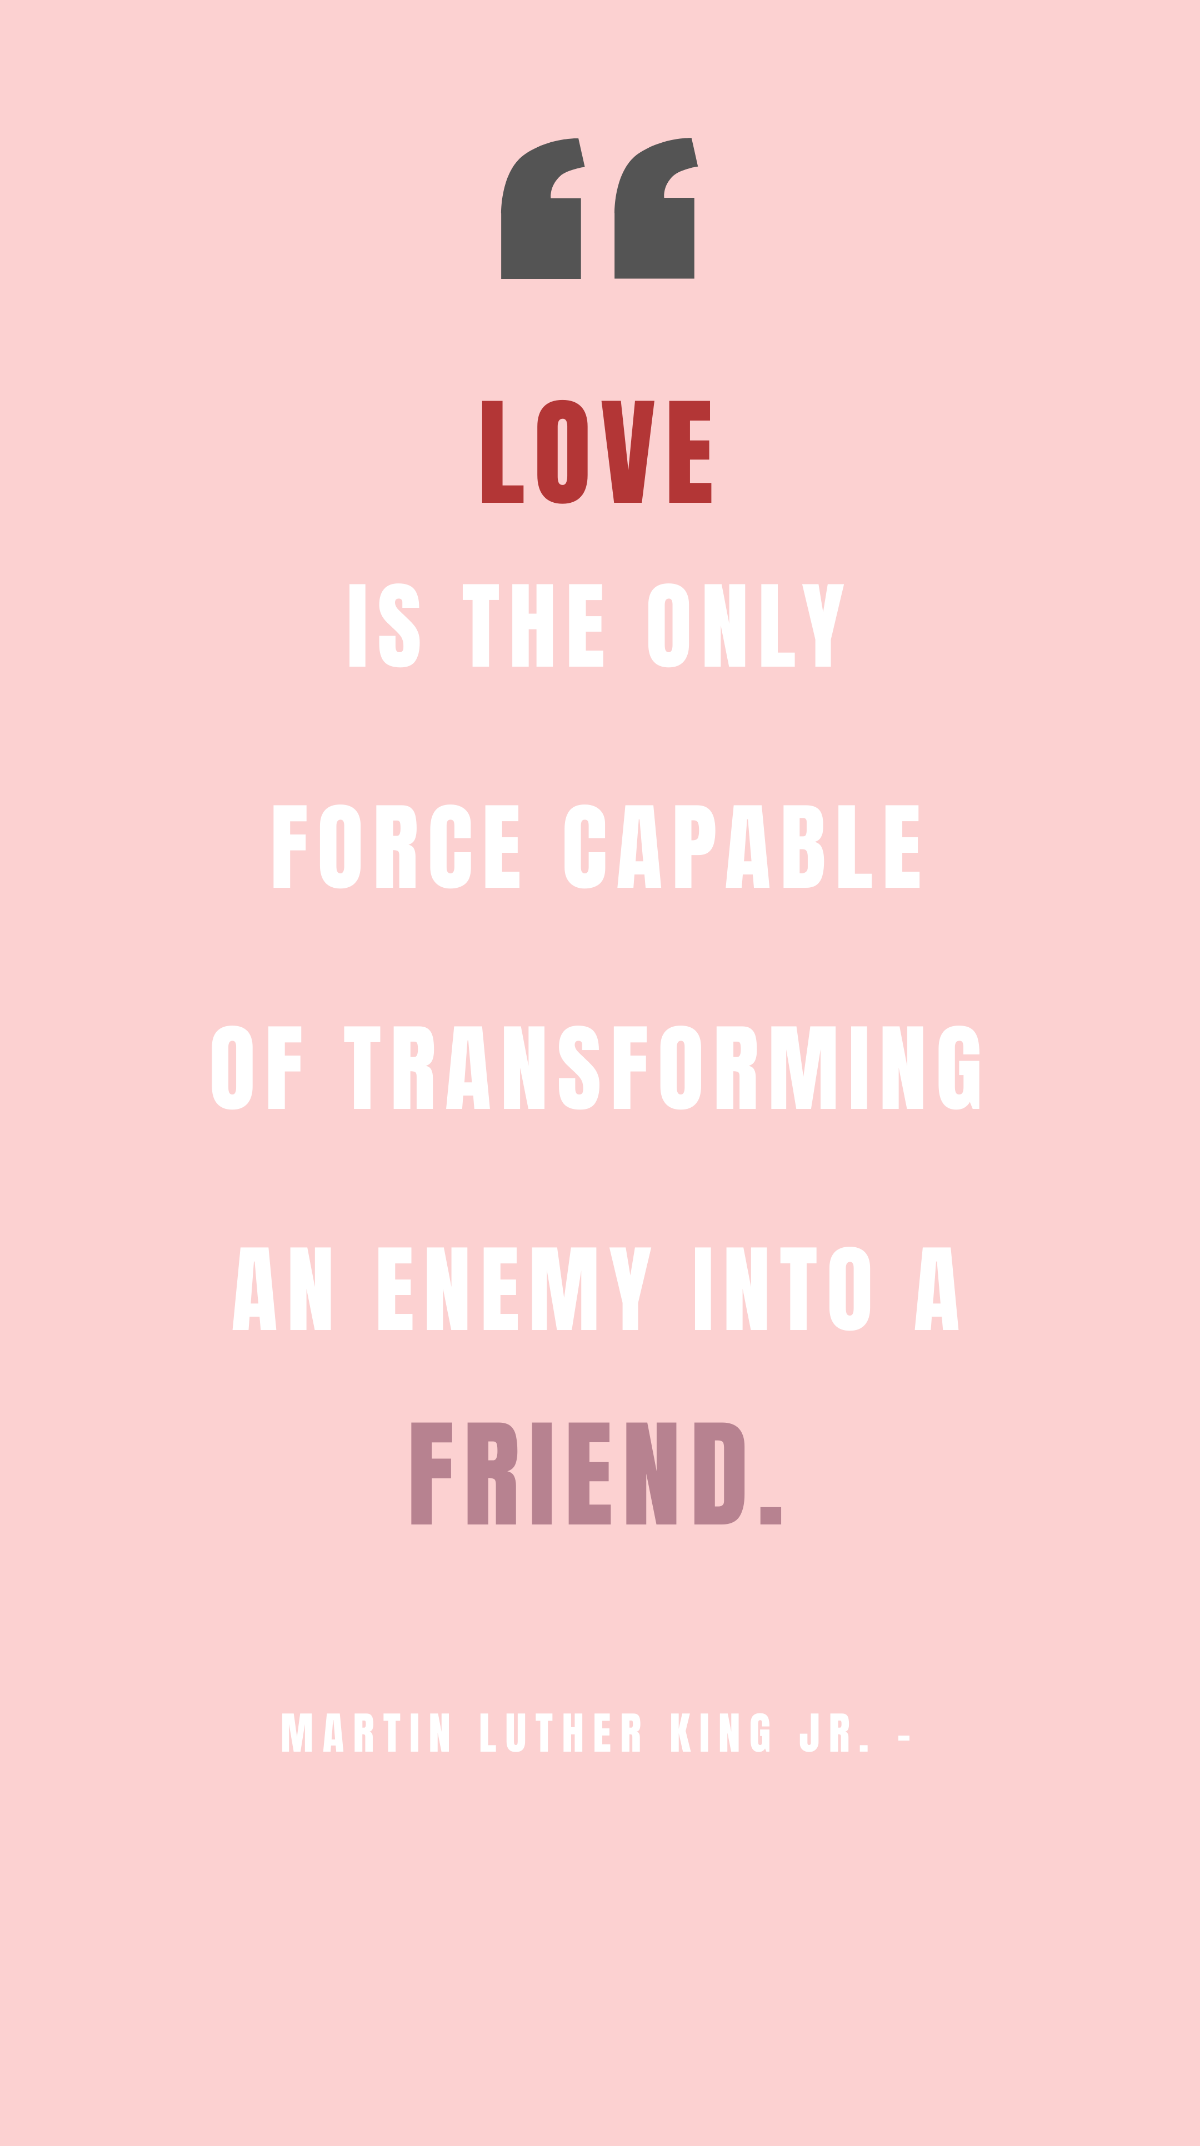 Free Martin Luther King Jr. - Love is the only force capable of transforming an enemy into a friend. Template